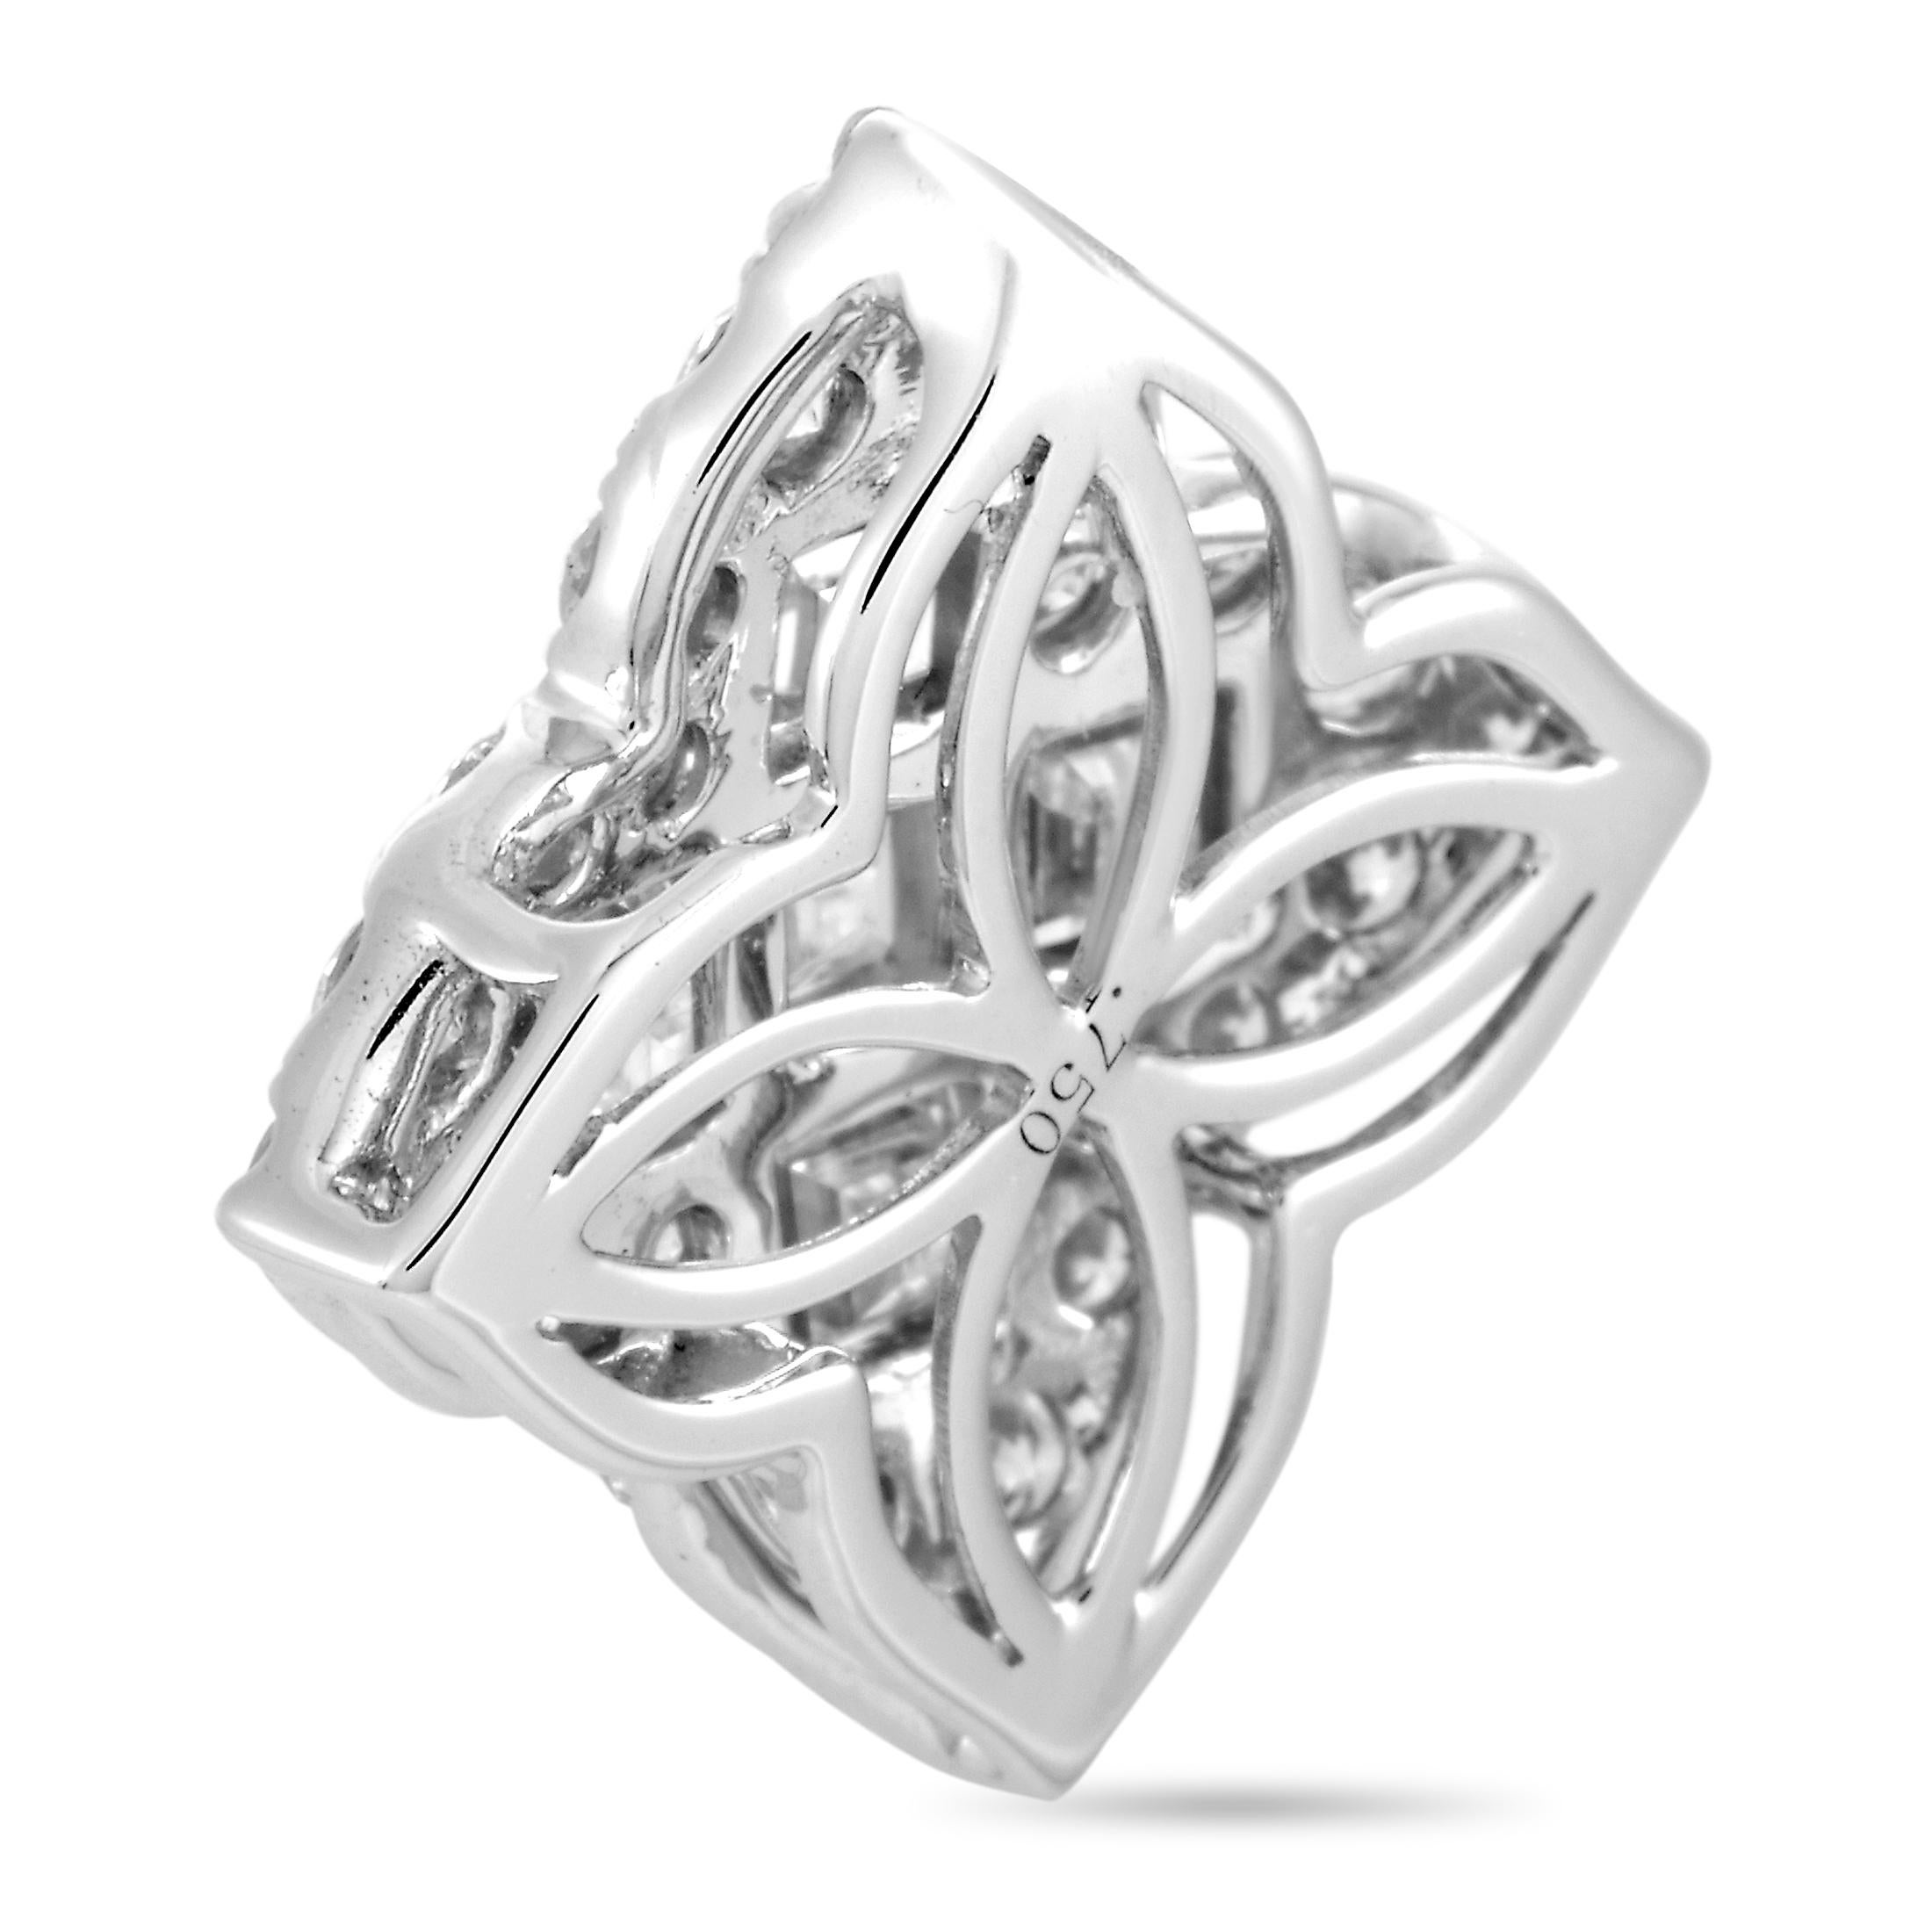 This LB Exclusive pendant is crafted from 18K white gold and set with round and asscher diamonds that total 0.55 and 0.95 carats respectively. The pendant weighs 2.4 grams and measures 0.75” in length and 0.75” in width.

Offered in brand new